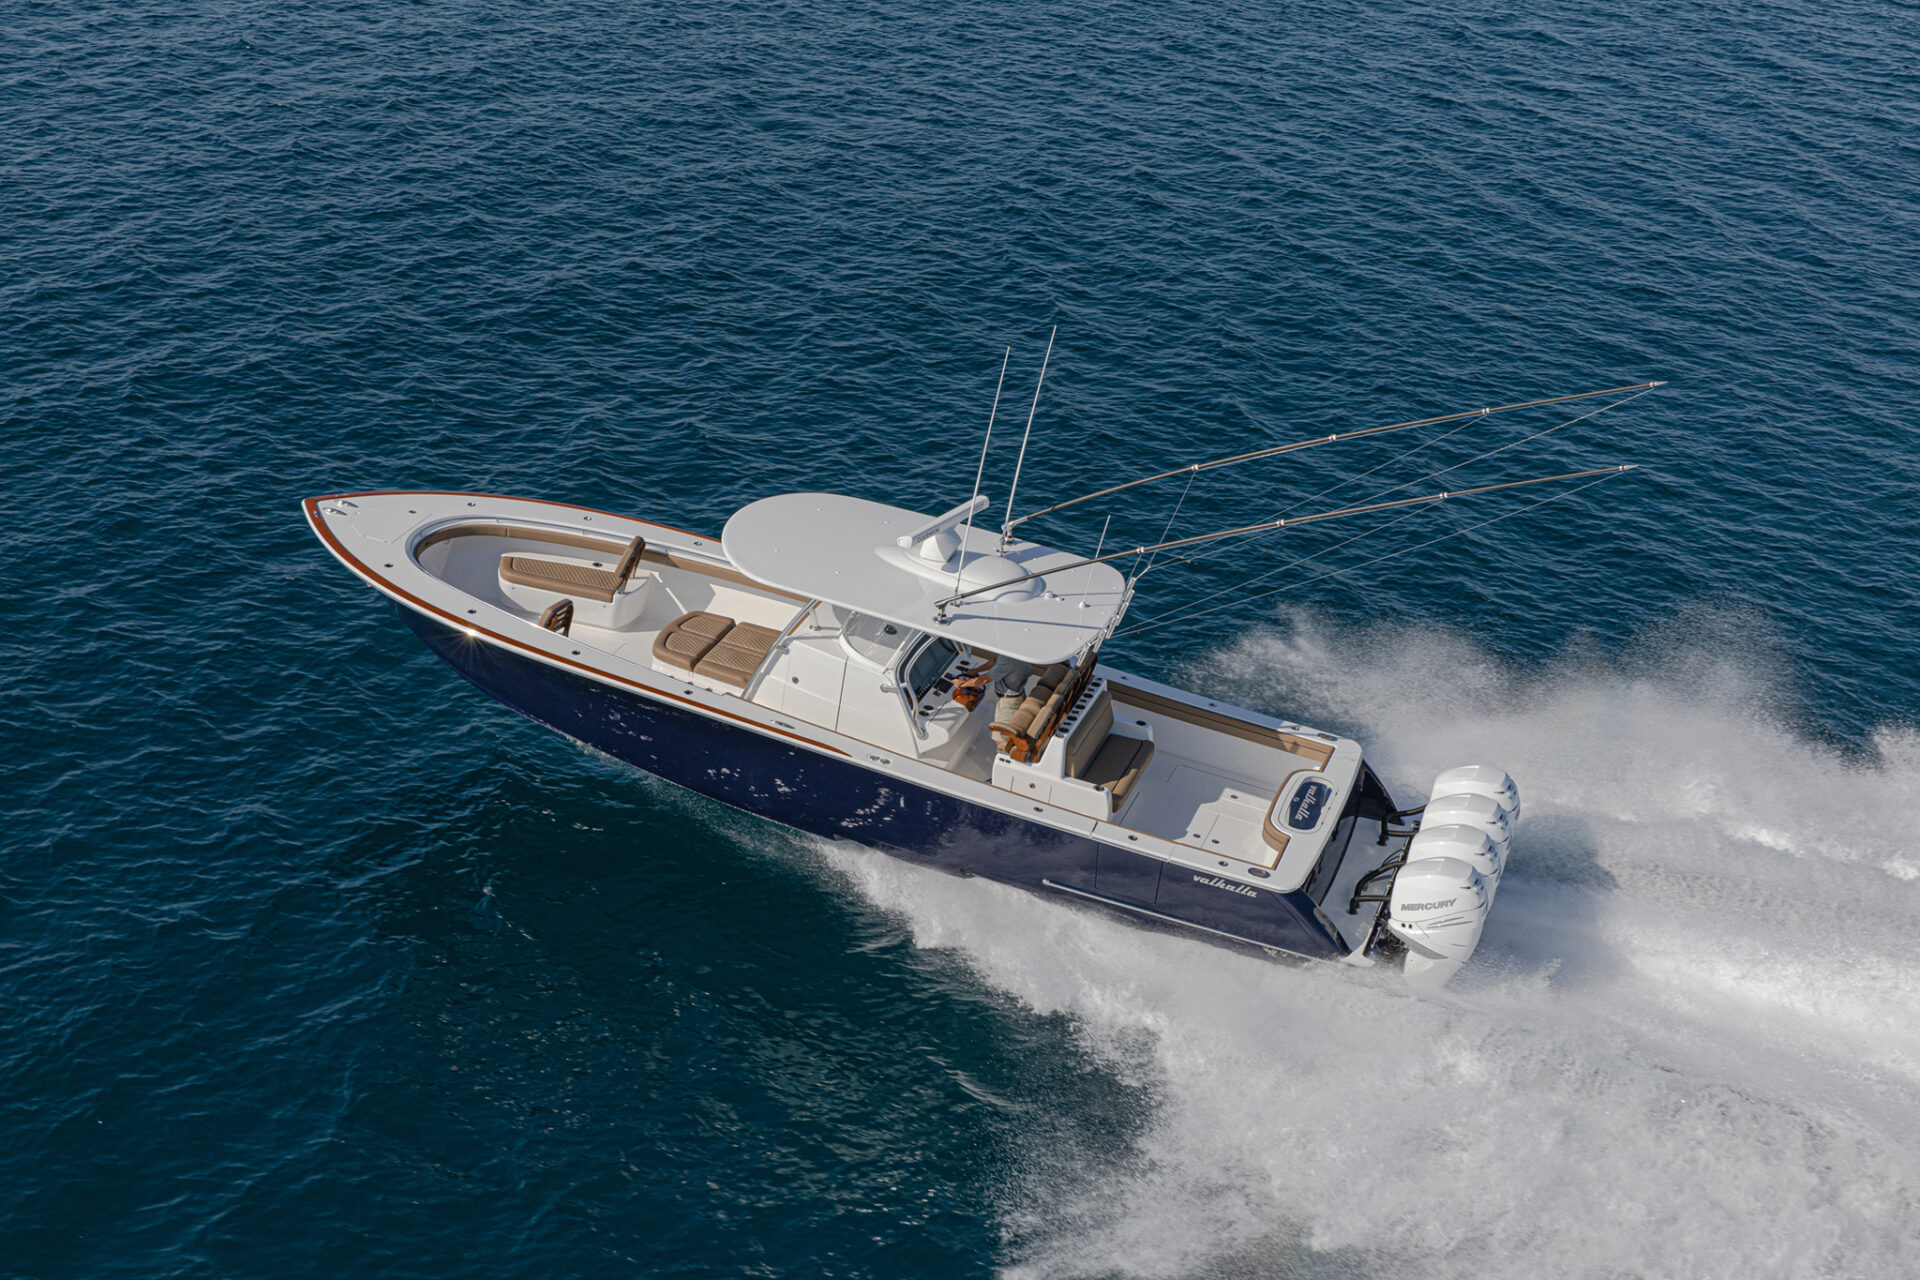 The Valhalla Experience: A Deep Dive into the World of High-Performance Center-Console Boats